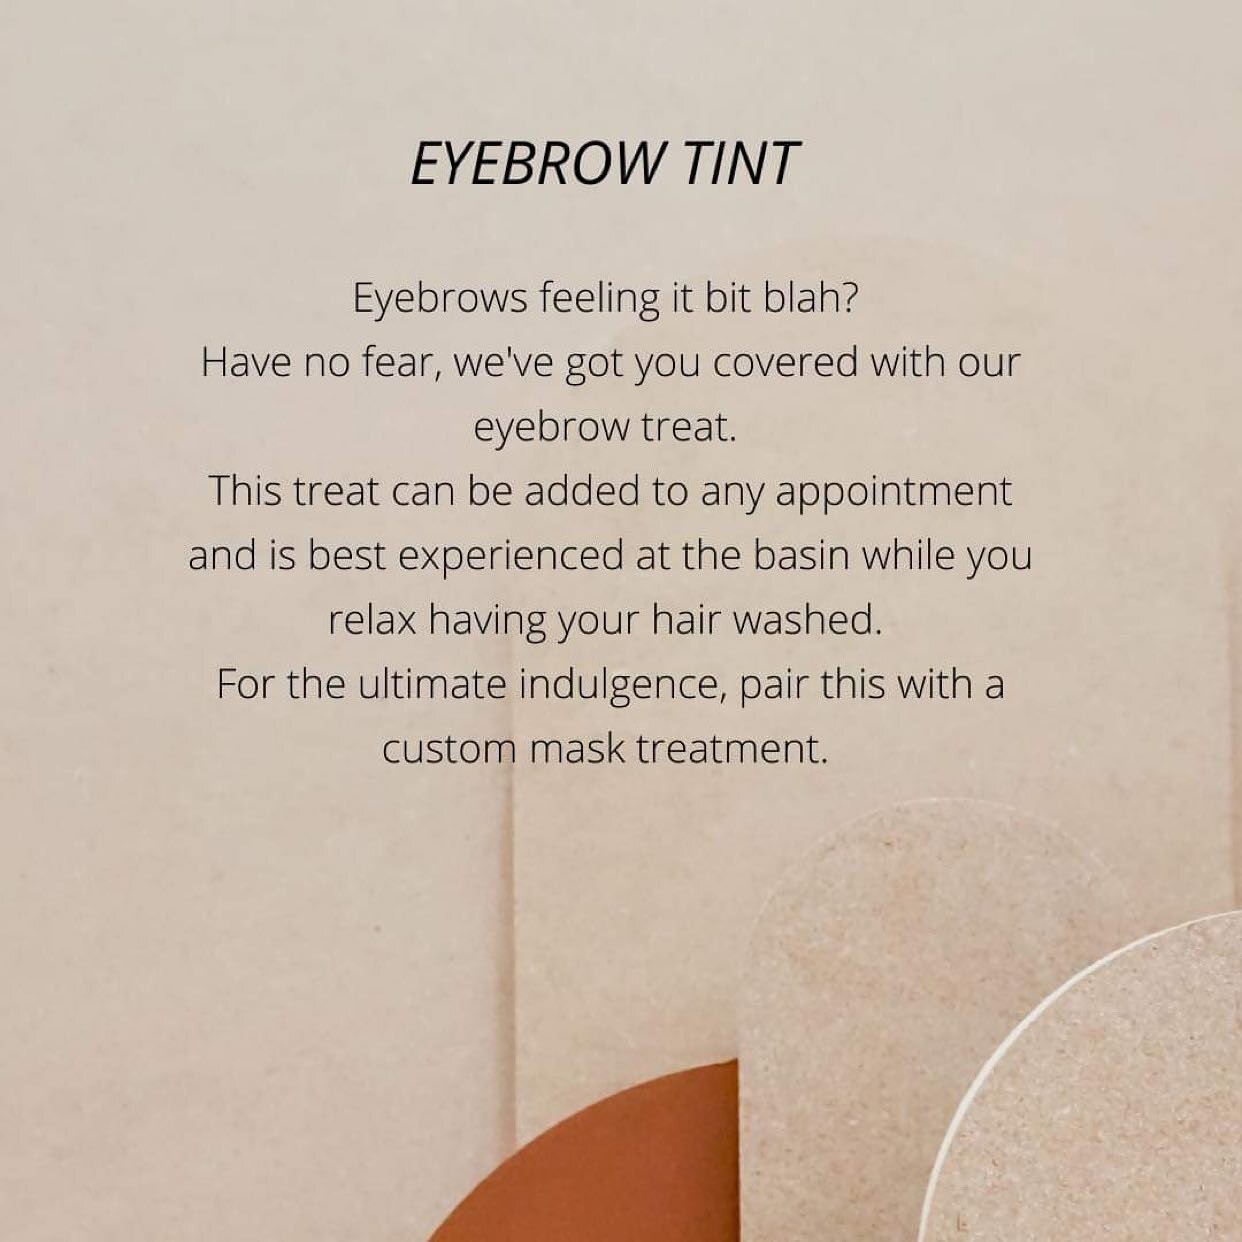 TREATS MENU | EYEBROW TINT

A quick refresh for your brows ✨
You will walk out of the salon feeling extra glamorous 😍